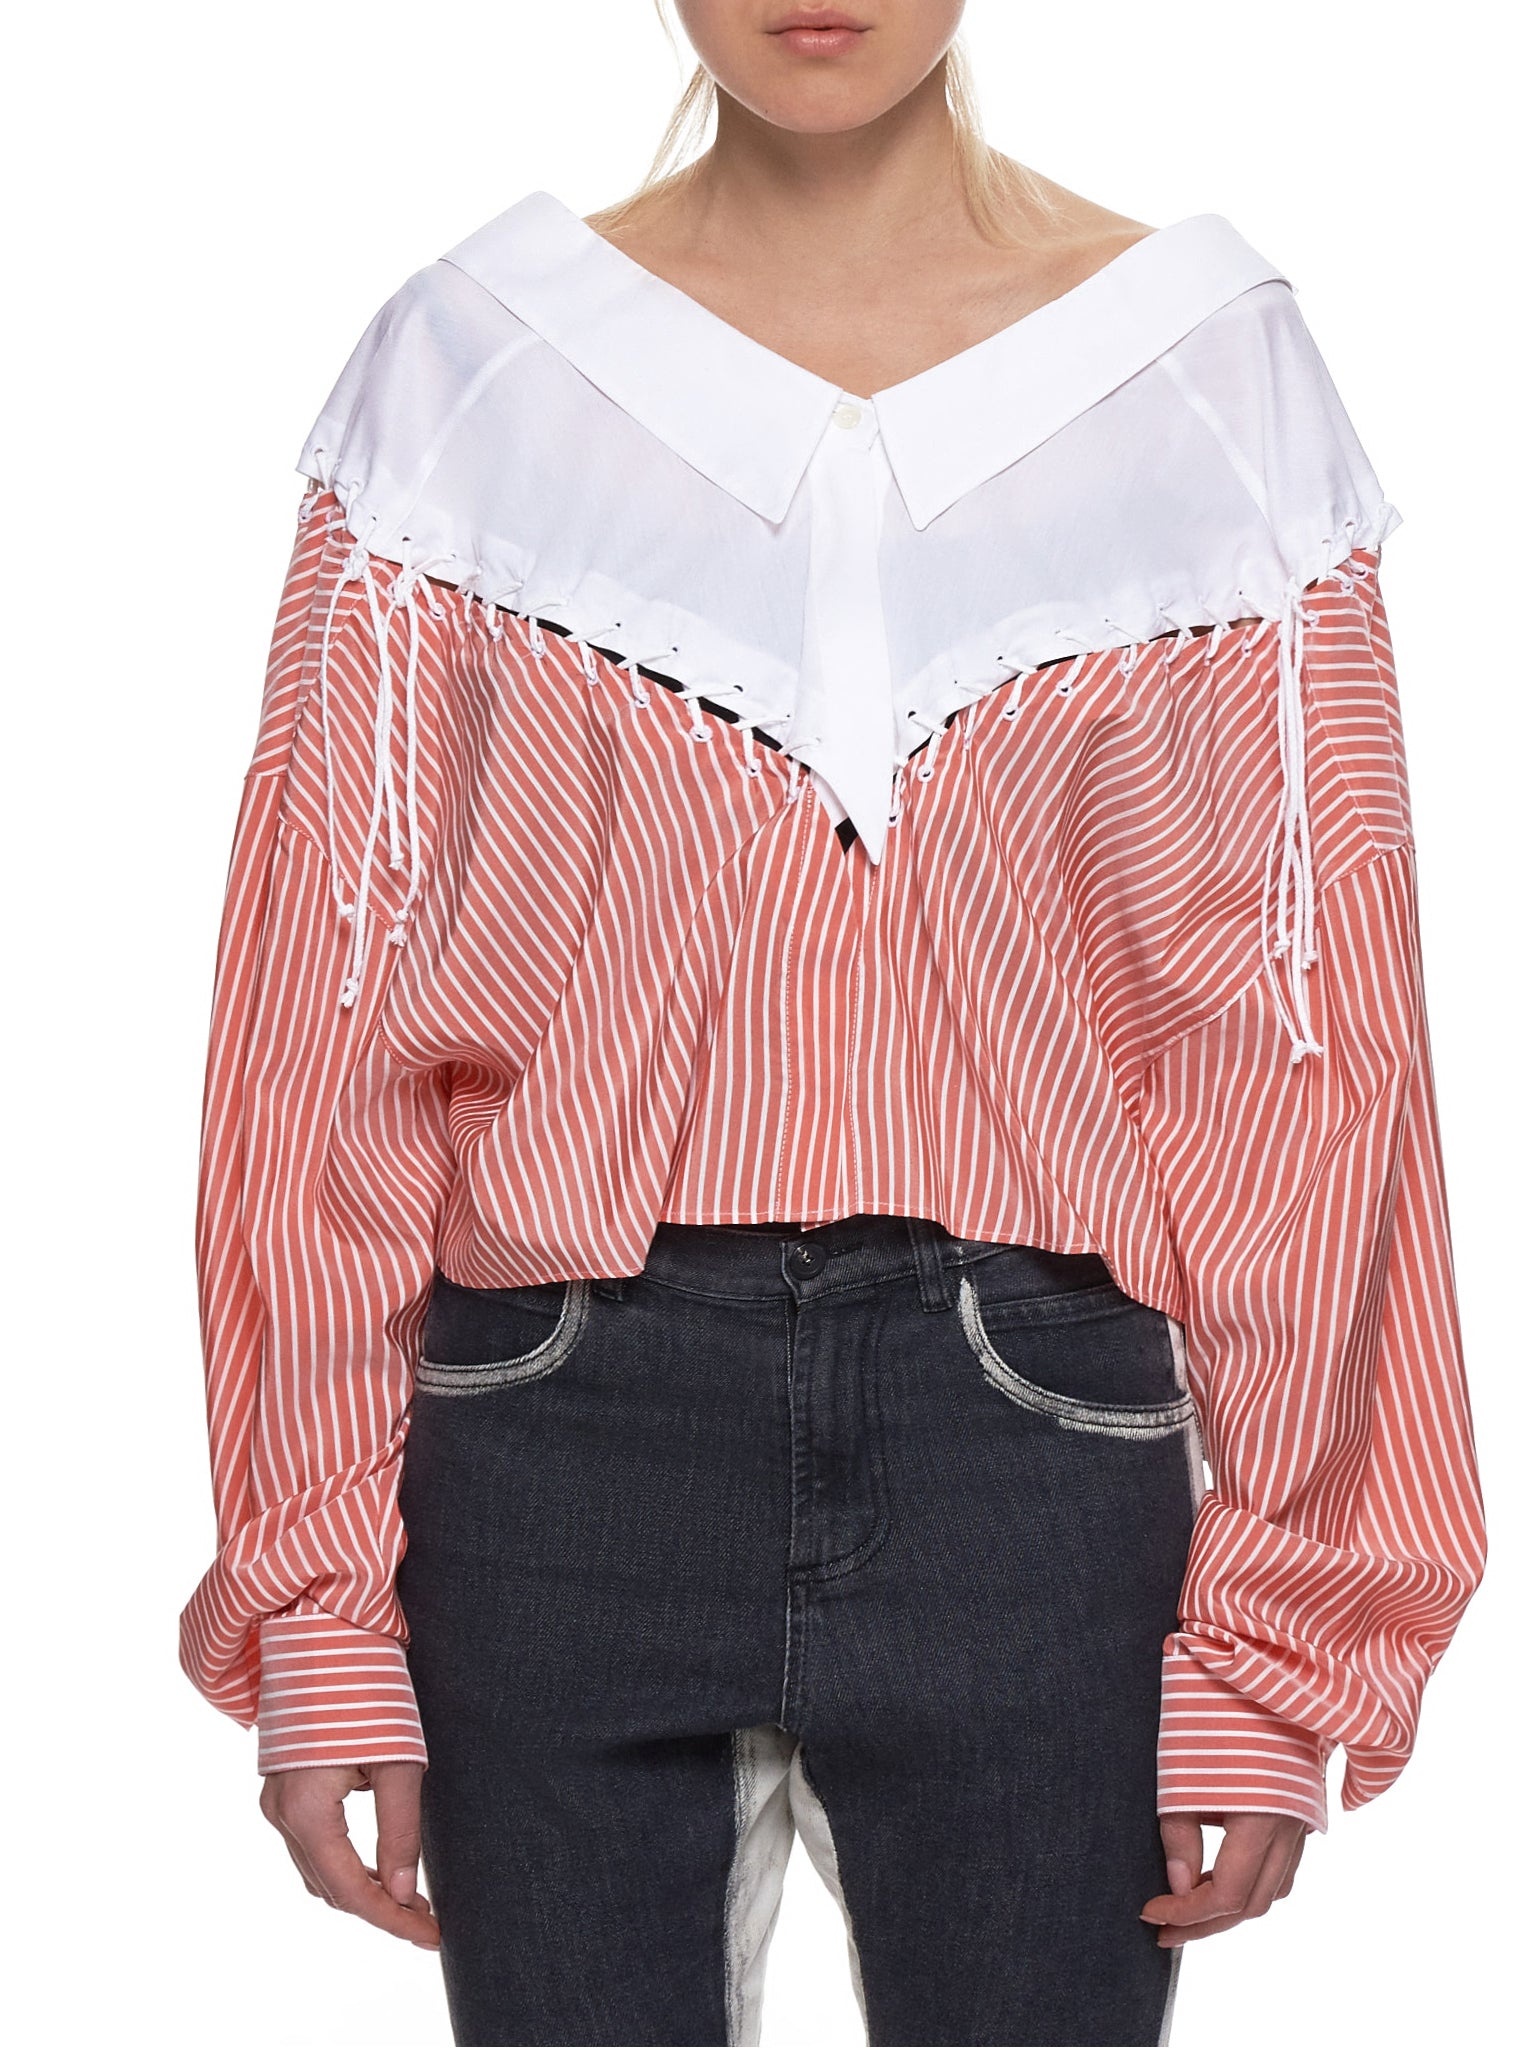 Lace Up Stripe Top - 1